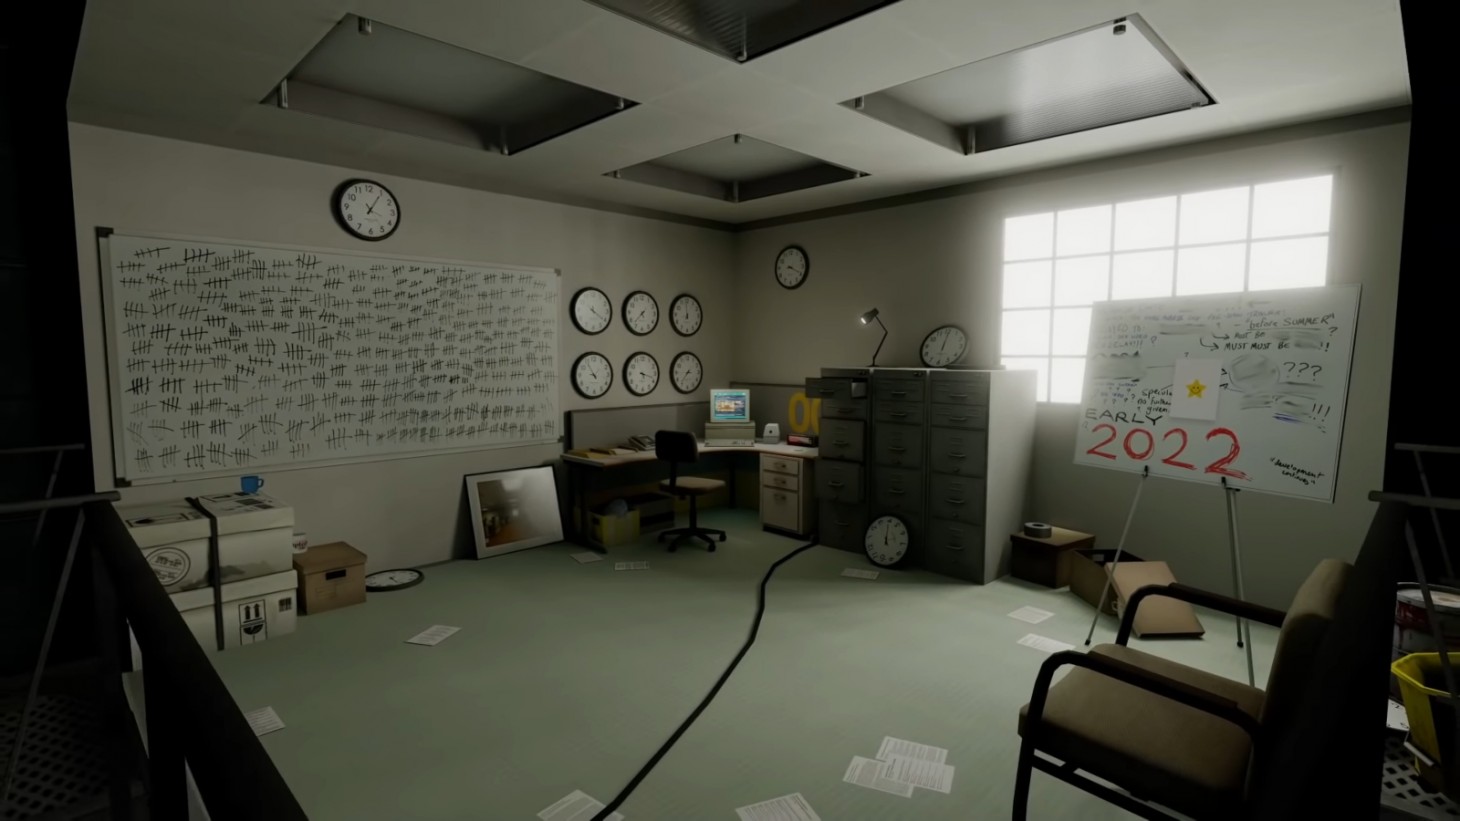 Stanley ultra deluxe. Stanley Parable Ultra Deluxe Стэнли. The Stanley Parable: Ultra Deluxe. The Stanley Parable Ultra Deluxe v.1.05 (2022). Ведро the Stanley Parable.